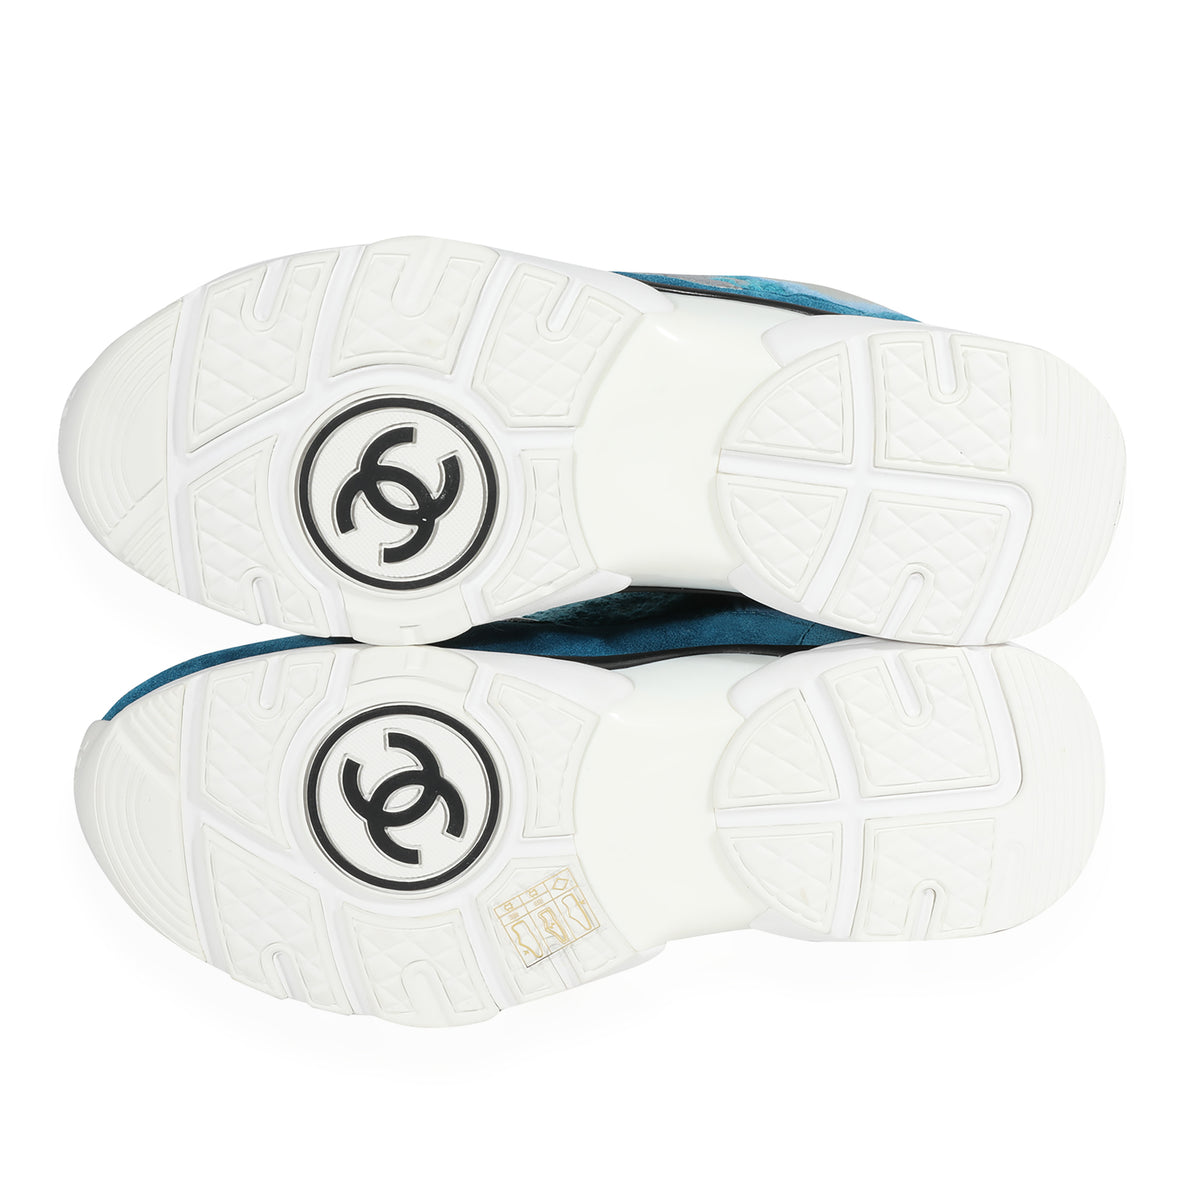 Chanel Wmns Sneaker 'Turquoise', myGemma